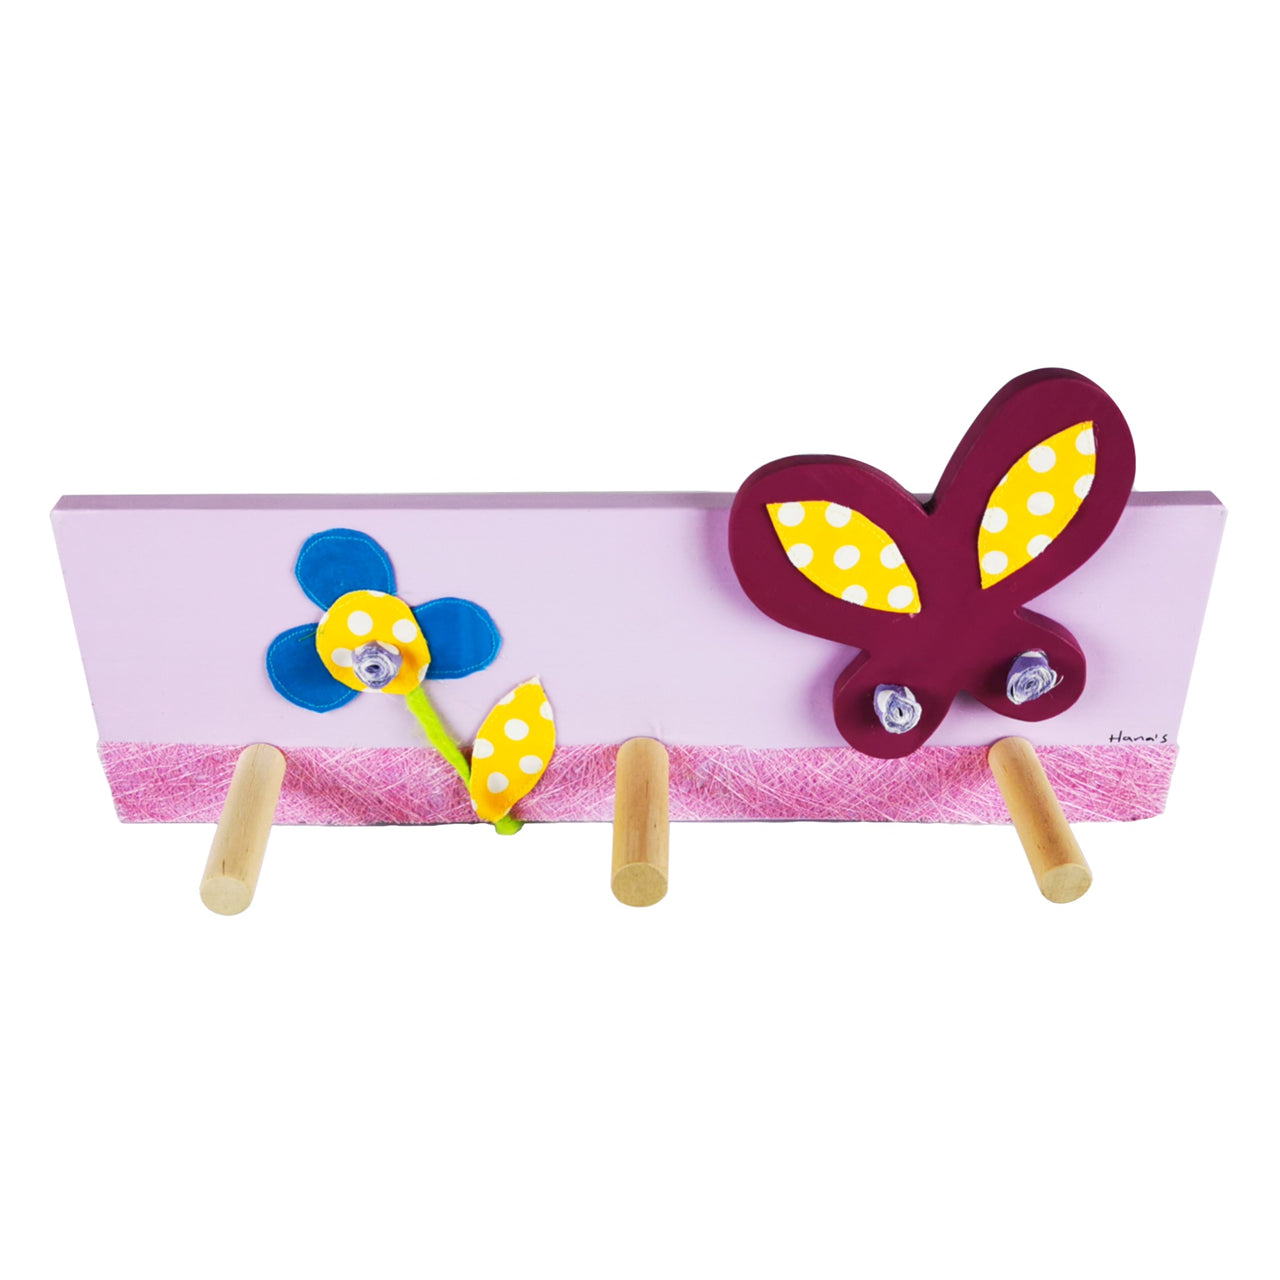 This hand-crafted coat rack has a light pink wooden base with a colourful flower and butterfly design layered on top. Creatively constructed from wood and layered fabric, the vibrant butterfly design is stunning. It has three wooden pegs for keeping your children's clothes organised.